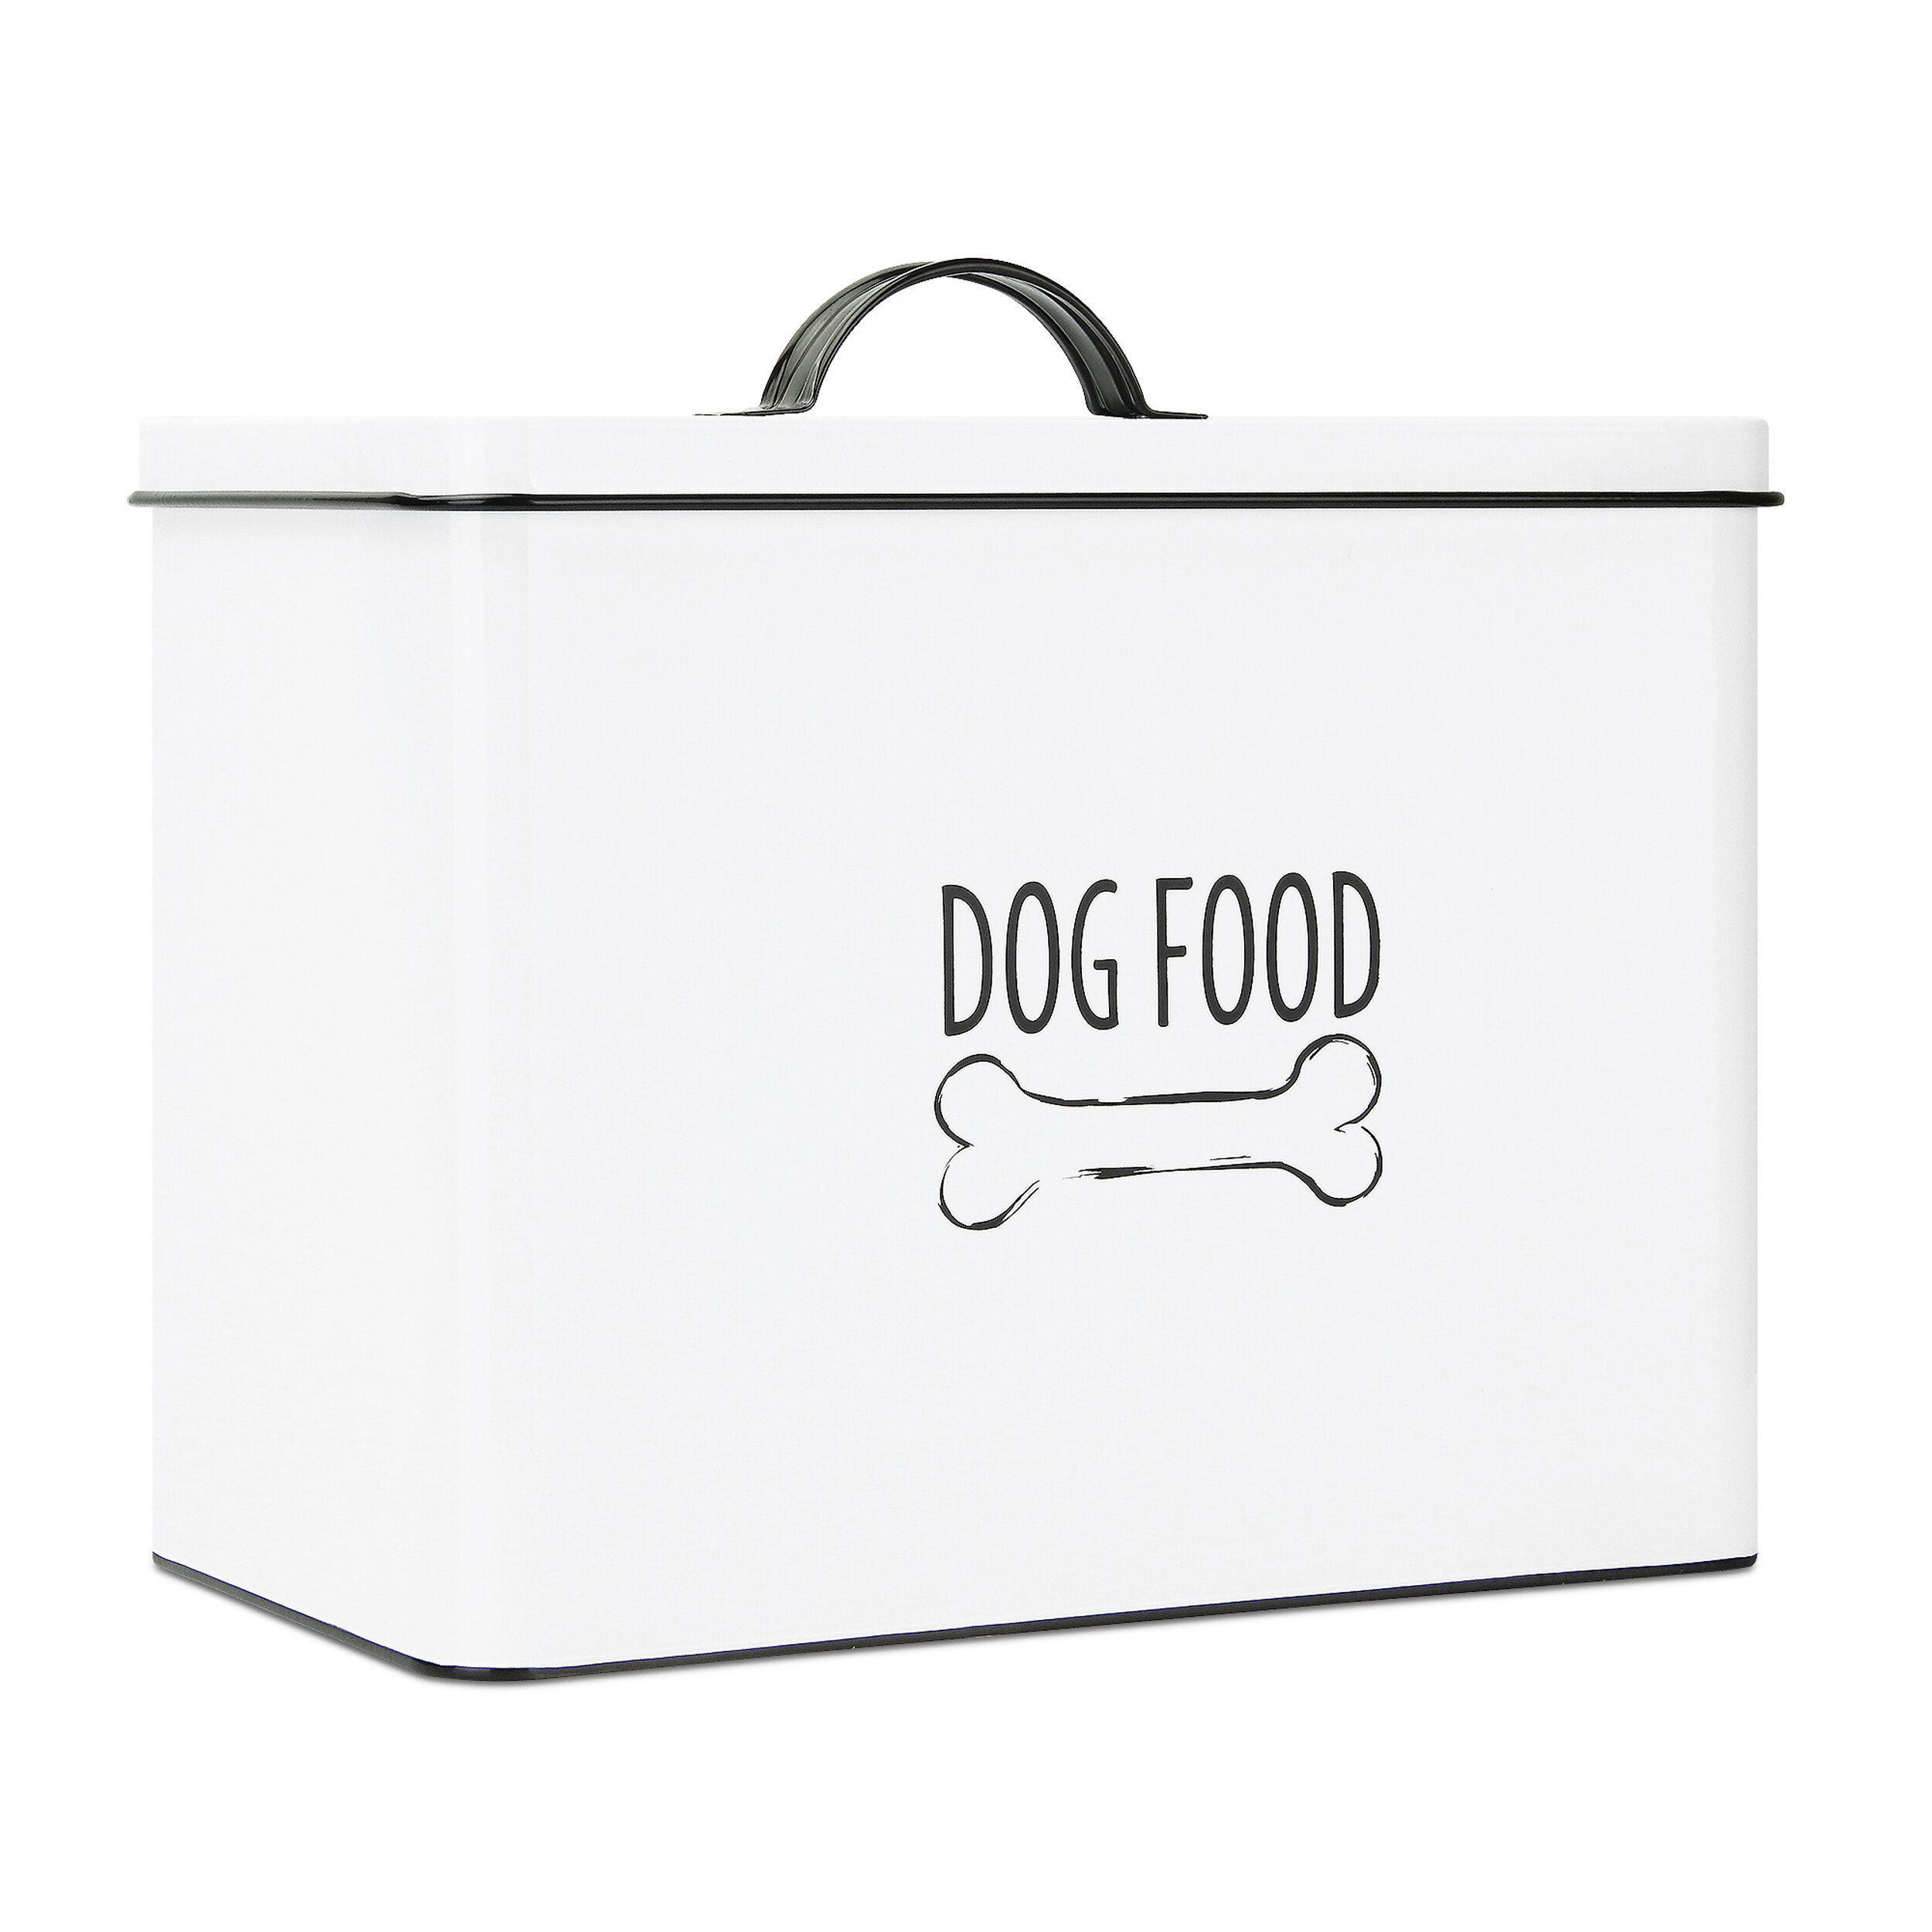 Outshine Co Outshine White Farmhouse Dog Food Bin - Can Be Personalized, Airtight Dog Food Storage Container With Lid, Powder Coated Carbon Steel, Cute Pet Food And Treat Canister